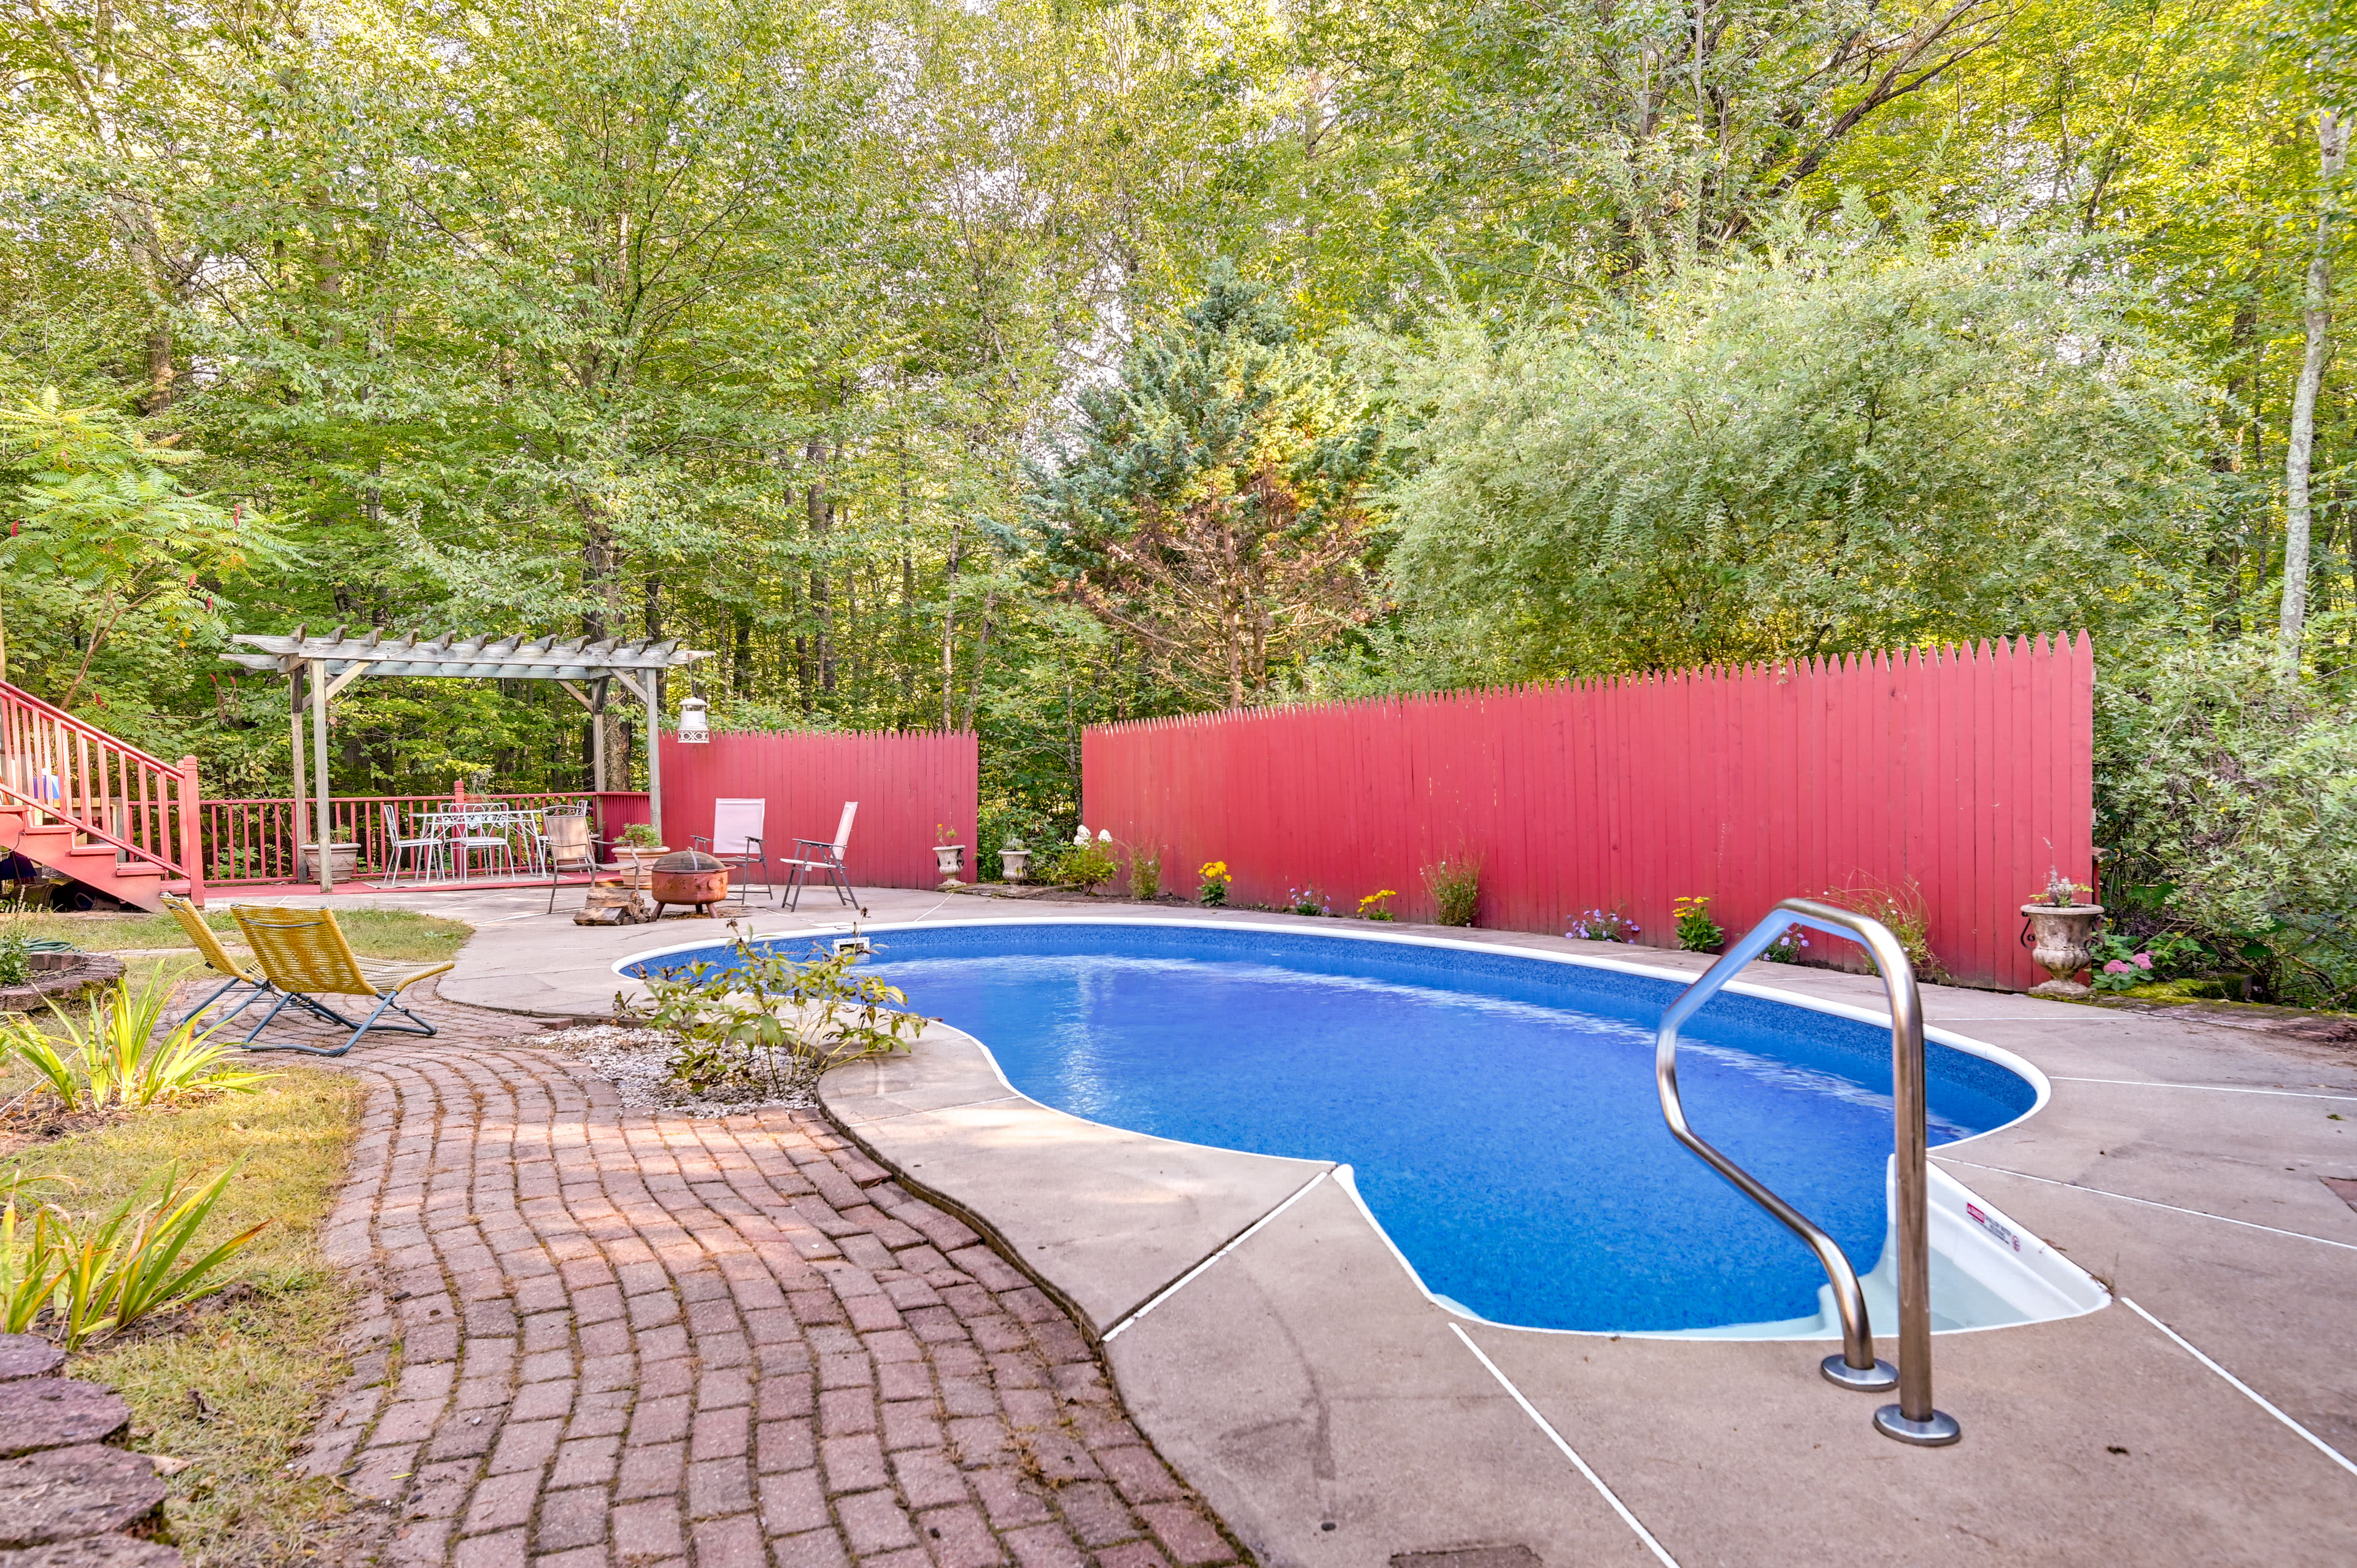 Seasonal Outdoor Pool (May-September) | Patio | Fire Pit